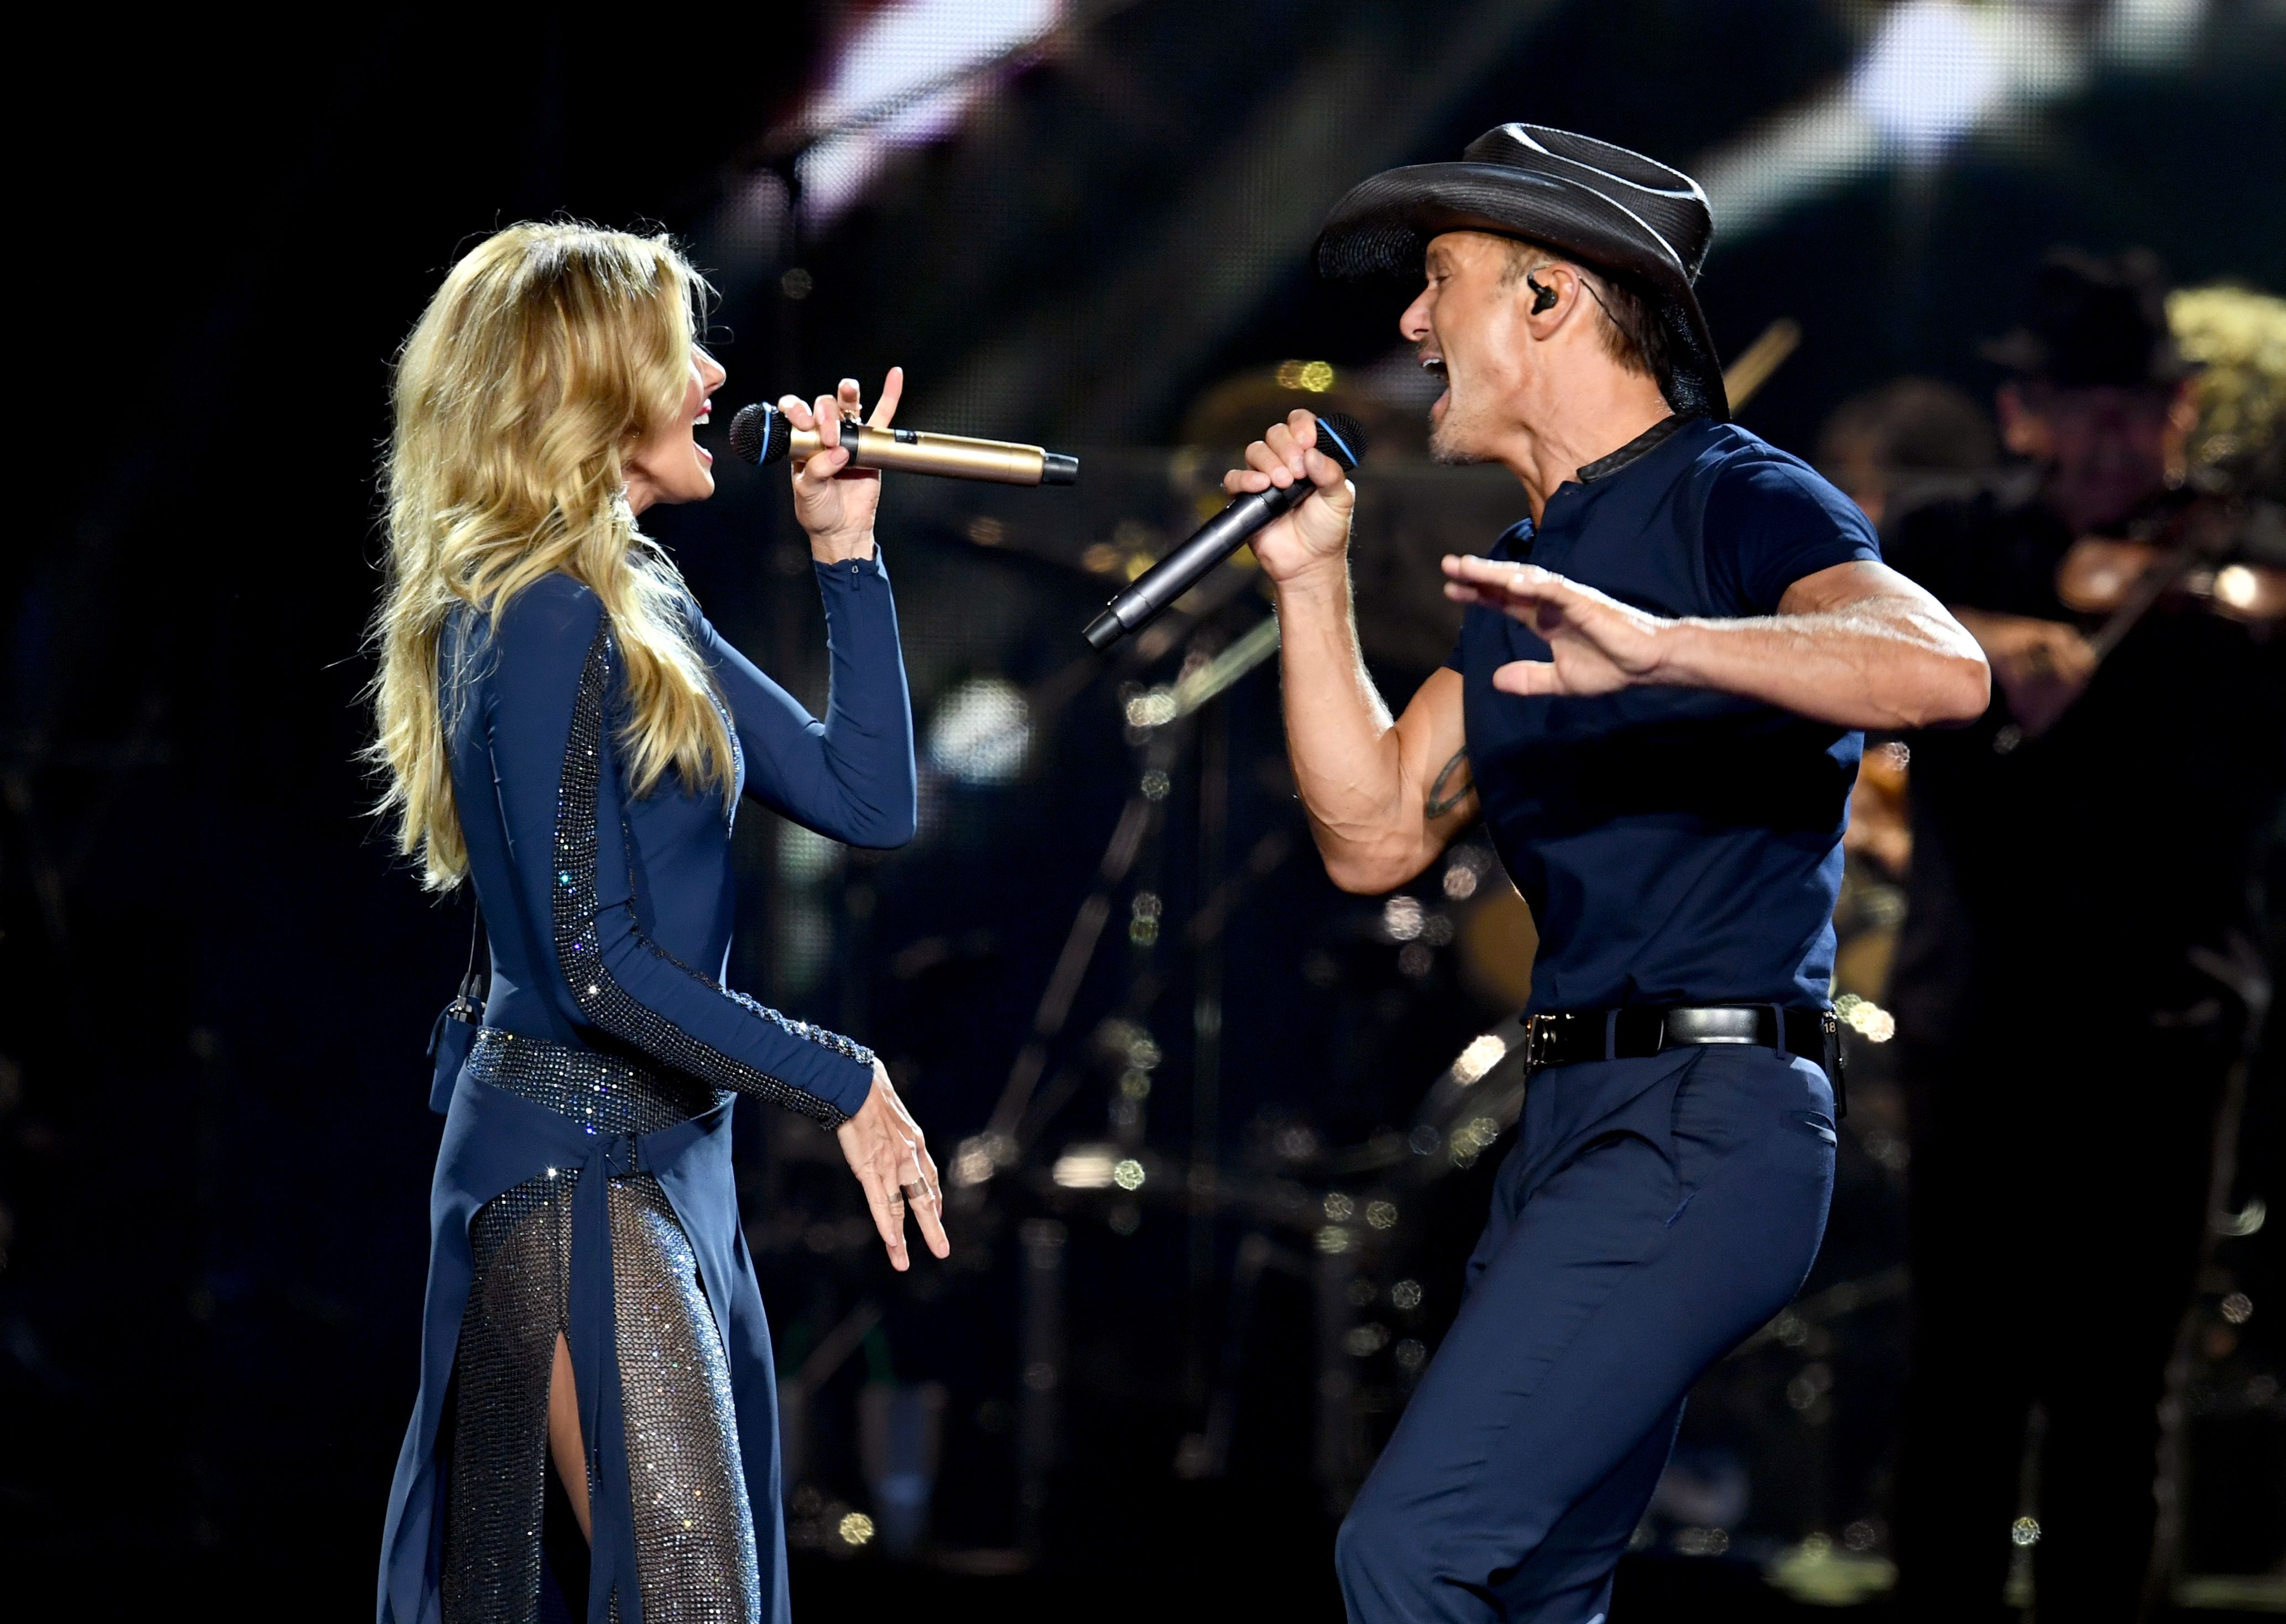 tim-mcgraw-and-faith-hill-perform-at-staples-center-814685780-59f0b1ce03f4020010971400.jpg